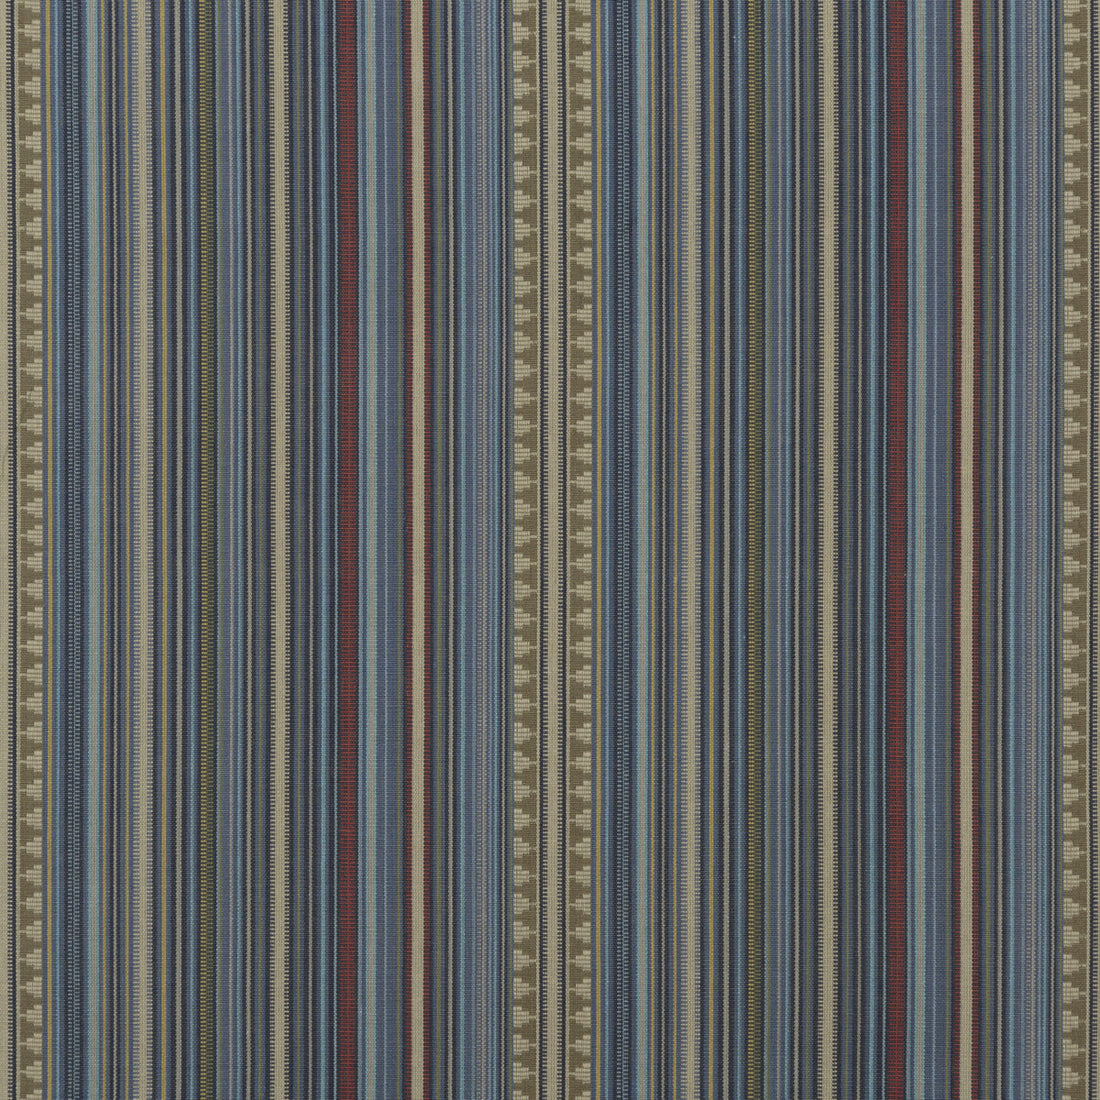 Pageant Stripe fabric in indigo color - pattern FD756.H10.0 - by Mulberry in the Festival collection